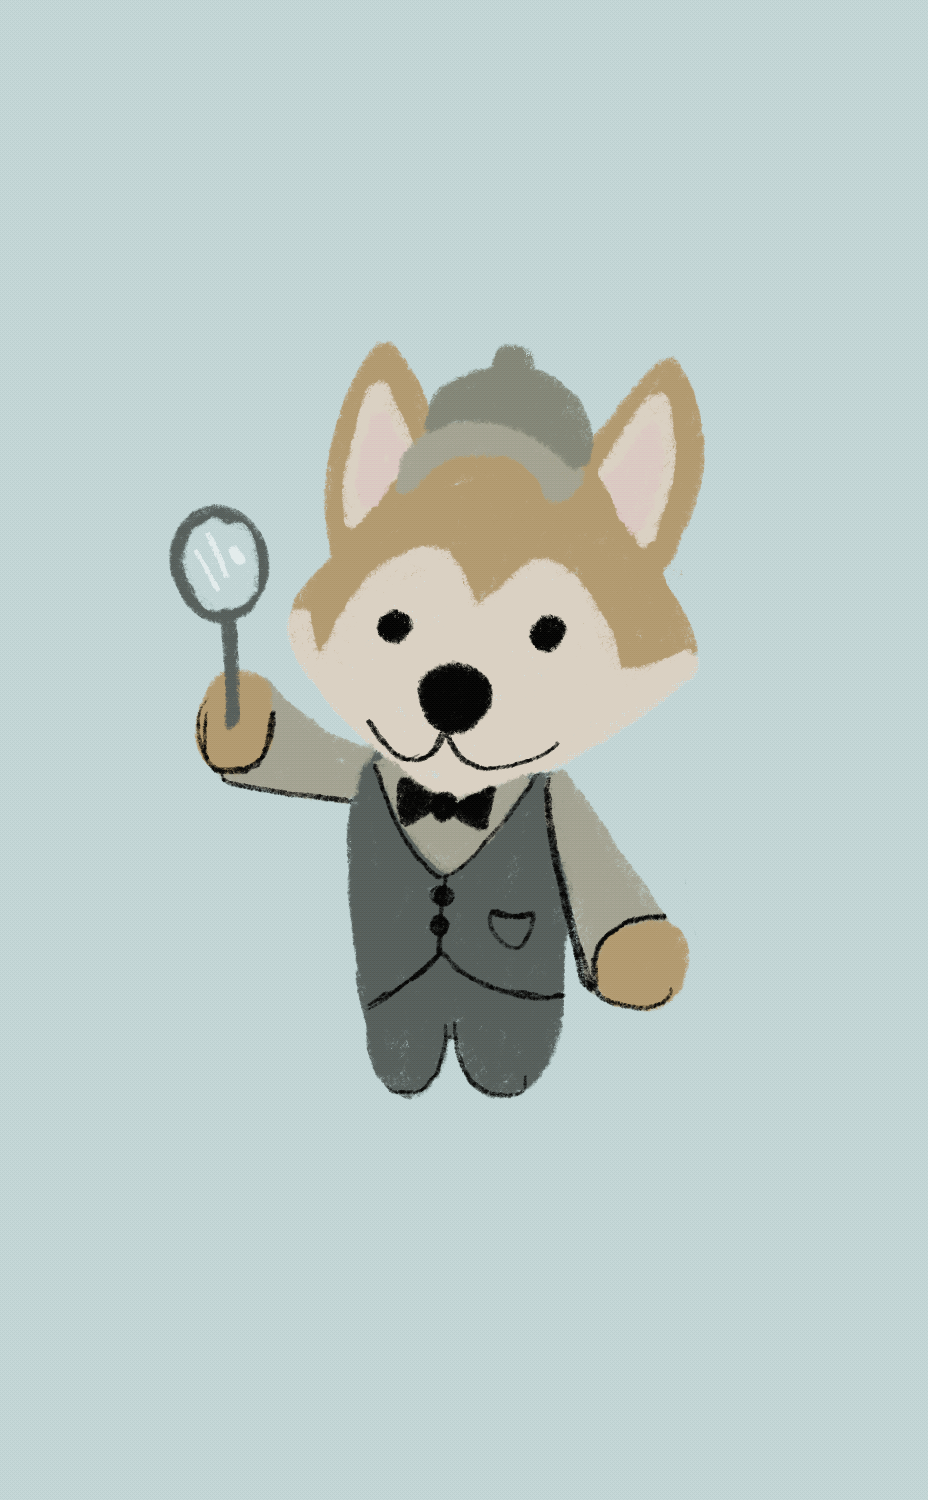 Dog dressed up in a detective outfit holding a magnifying glass